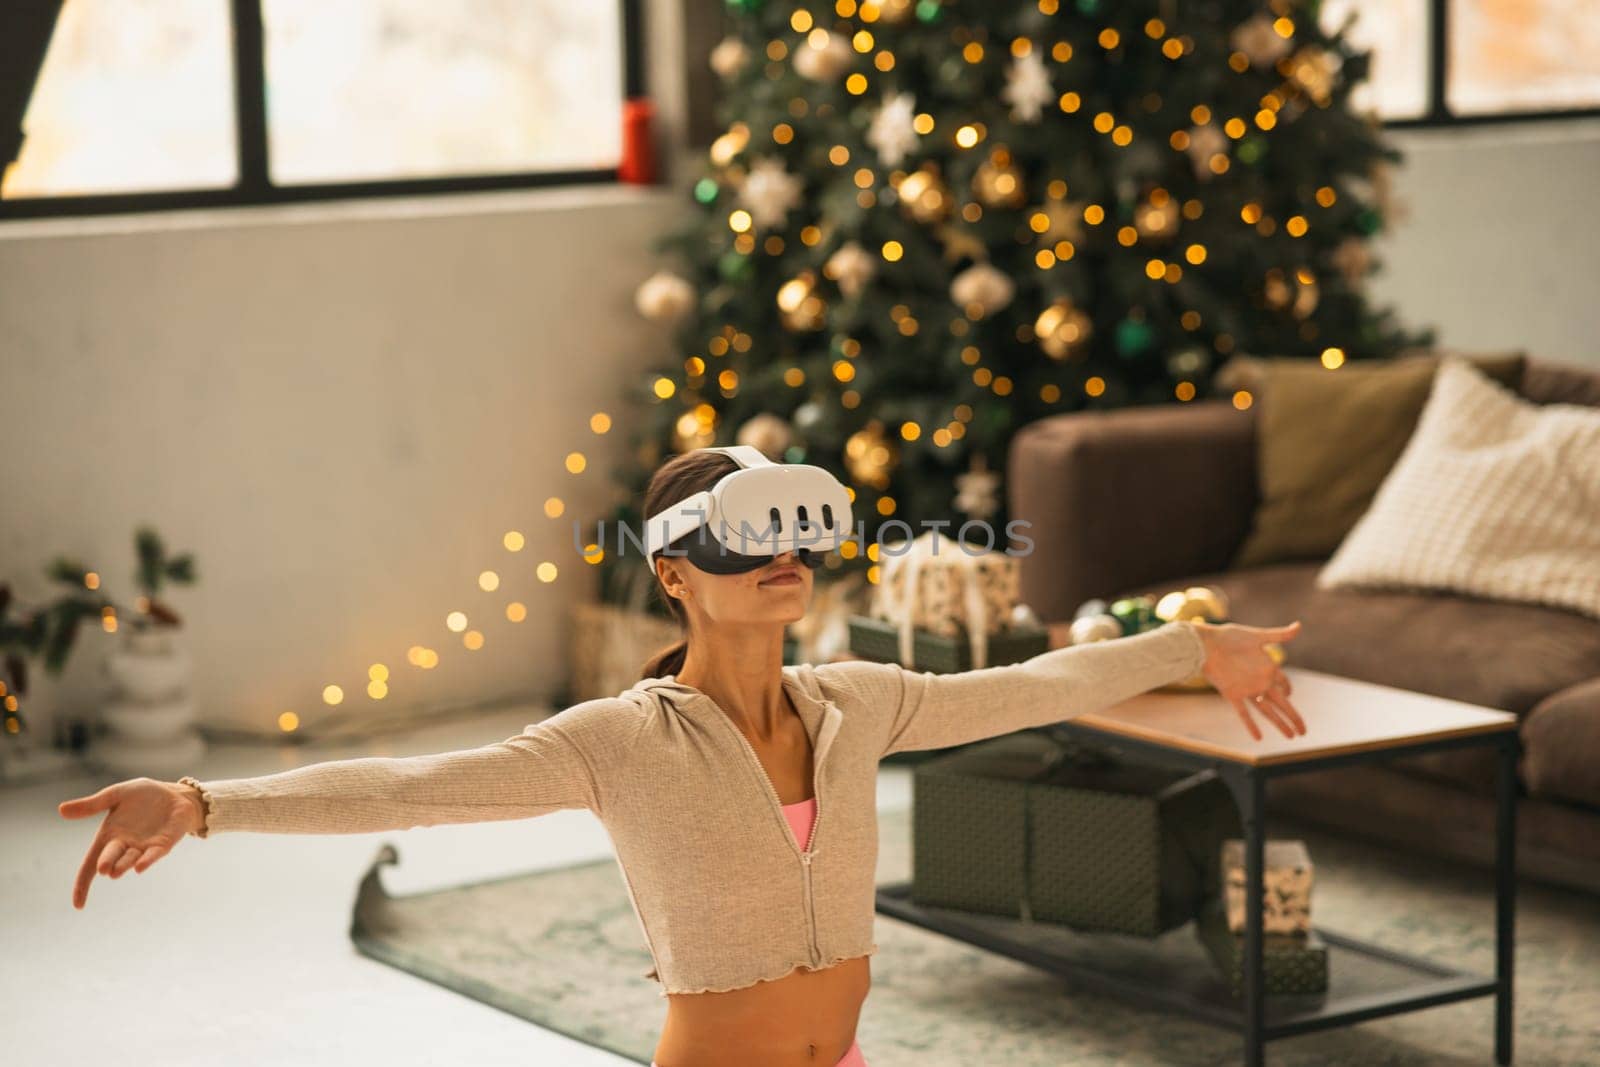 A sporty, fashionable woman wearing a virtual reality headset engages in yoga poses next to a Christmas tree. High quality photo